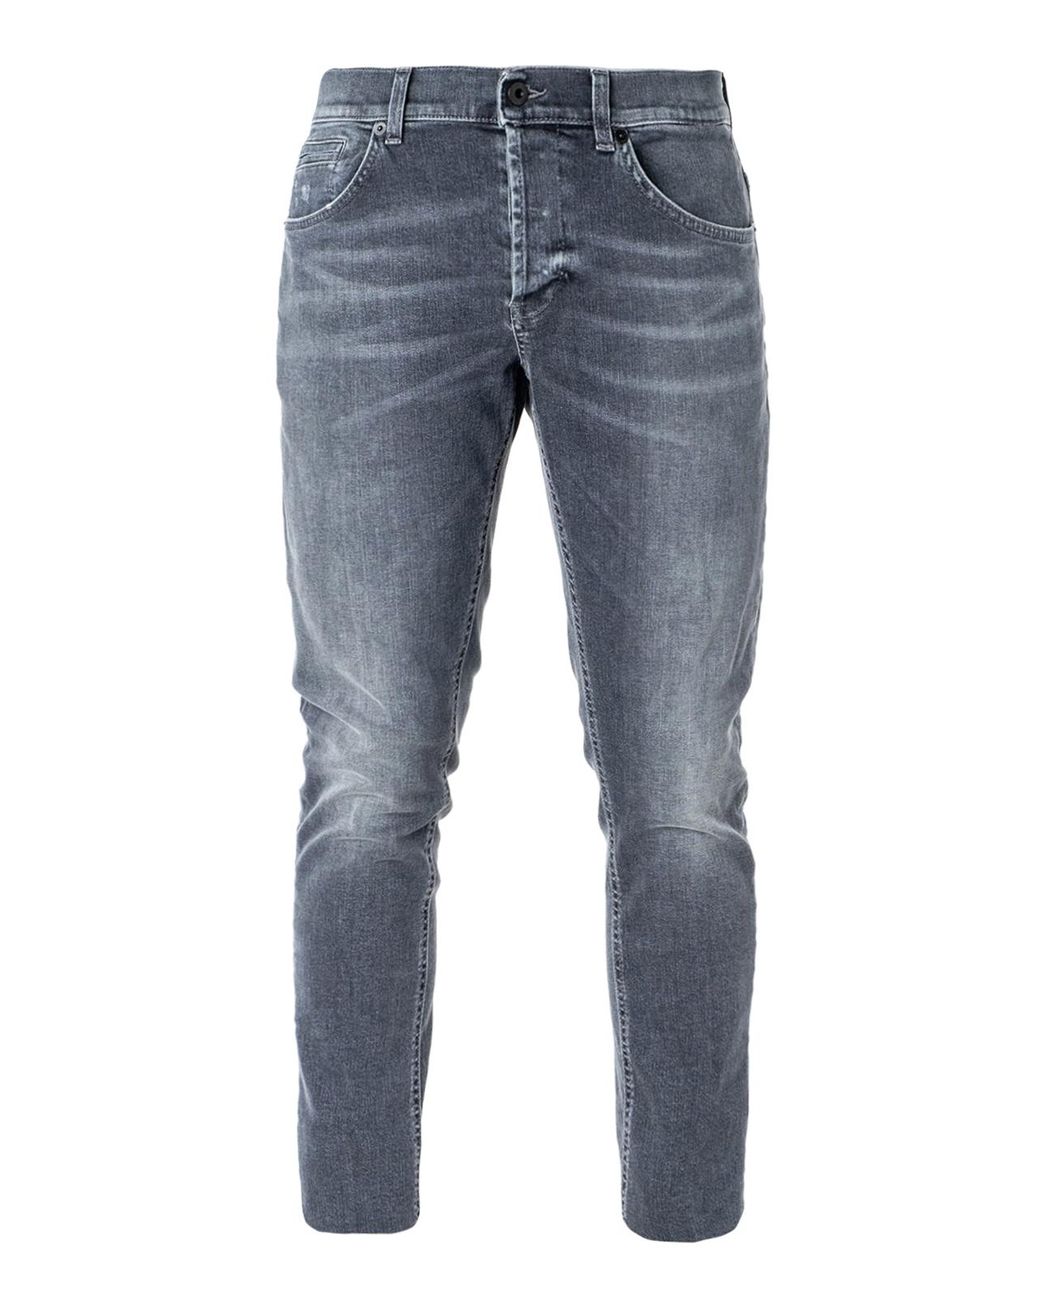 Dondup George Low Waist Grey Cotton Jeans in Gray for Men - Lyst